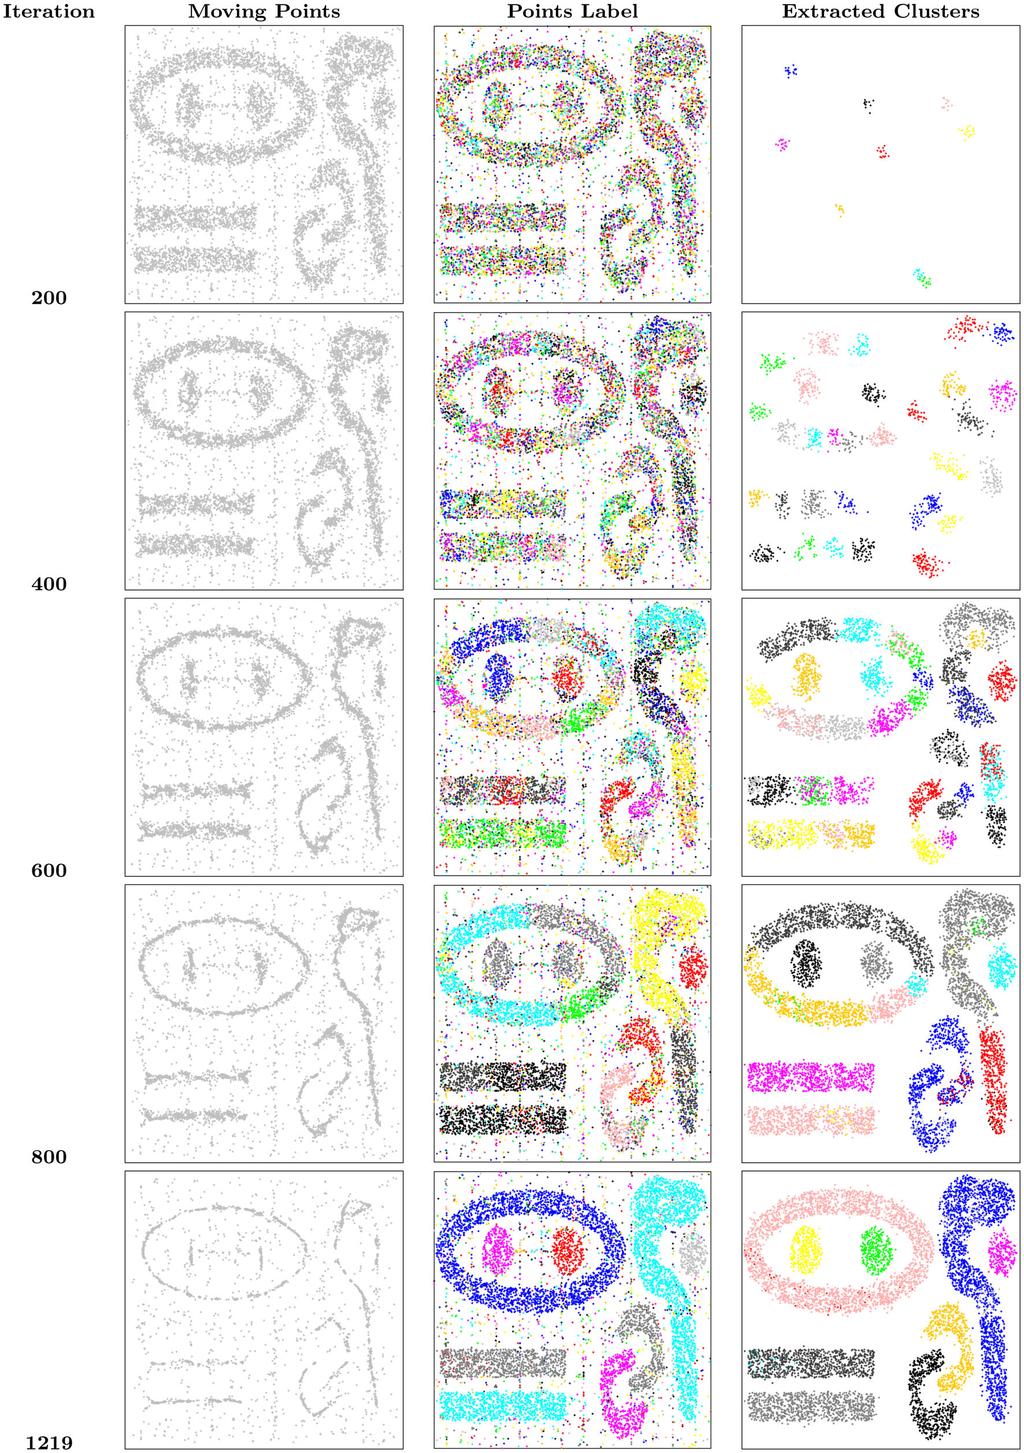 230 Fig. 10 Typical clustering result for the nine clusters Chameleon data set (t7.10) each 200 iterations.